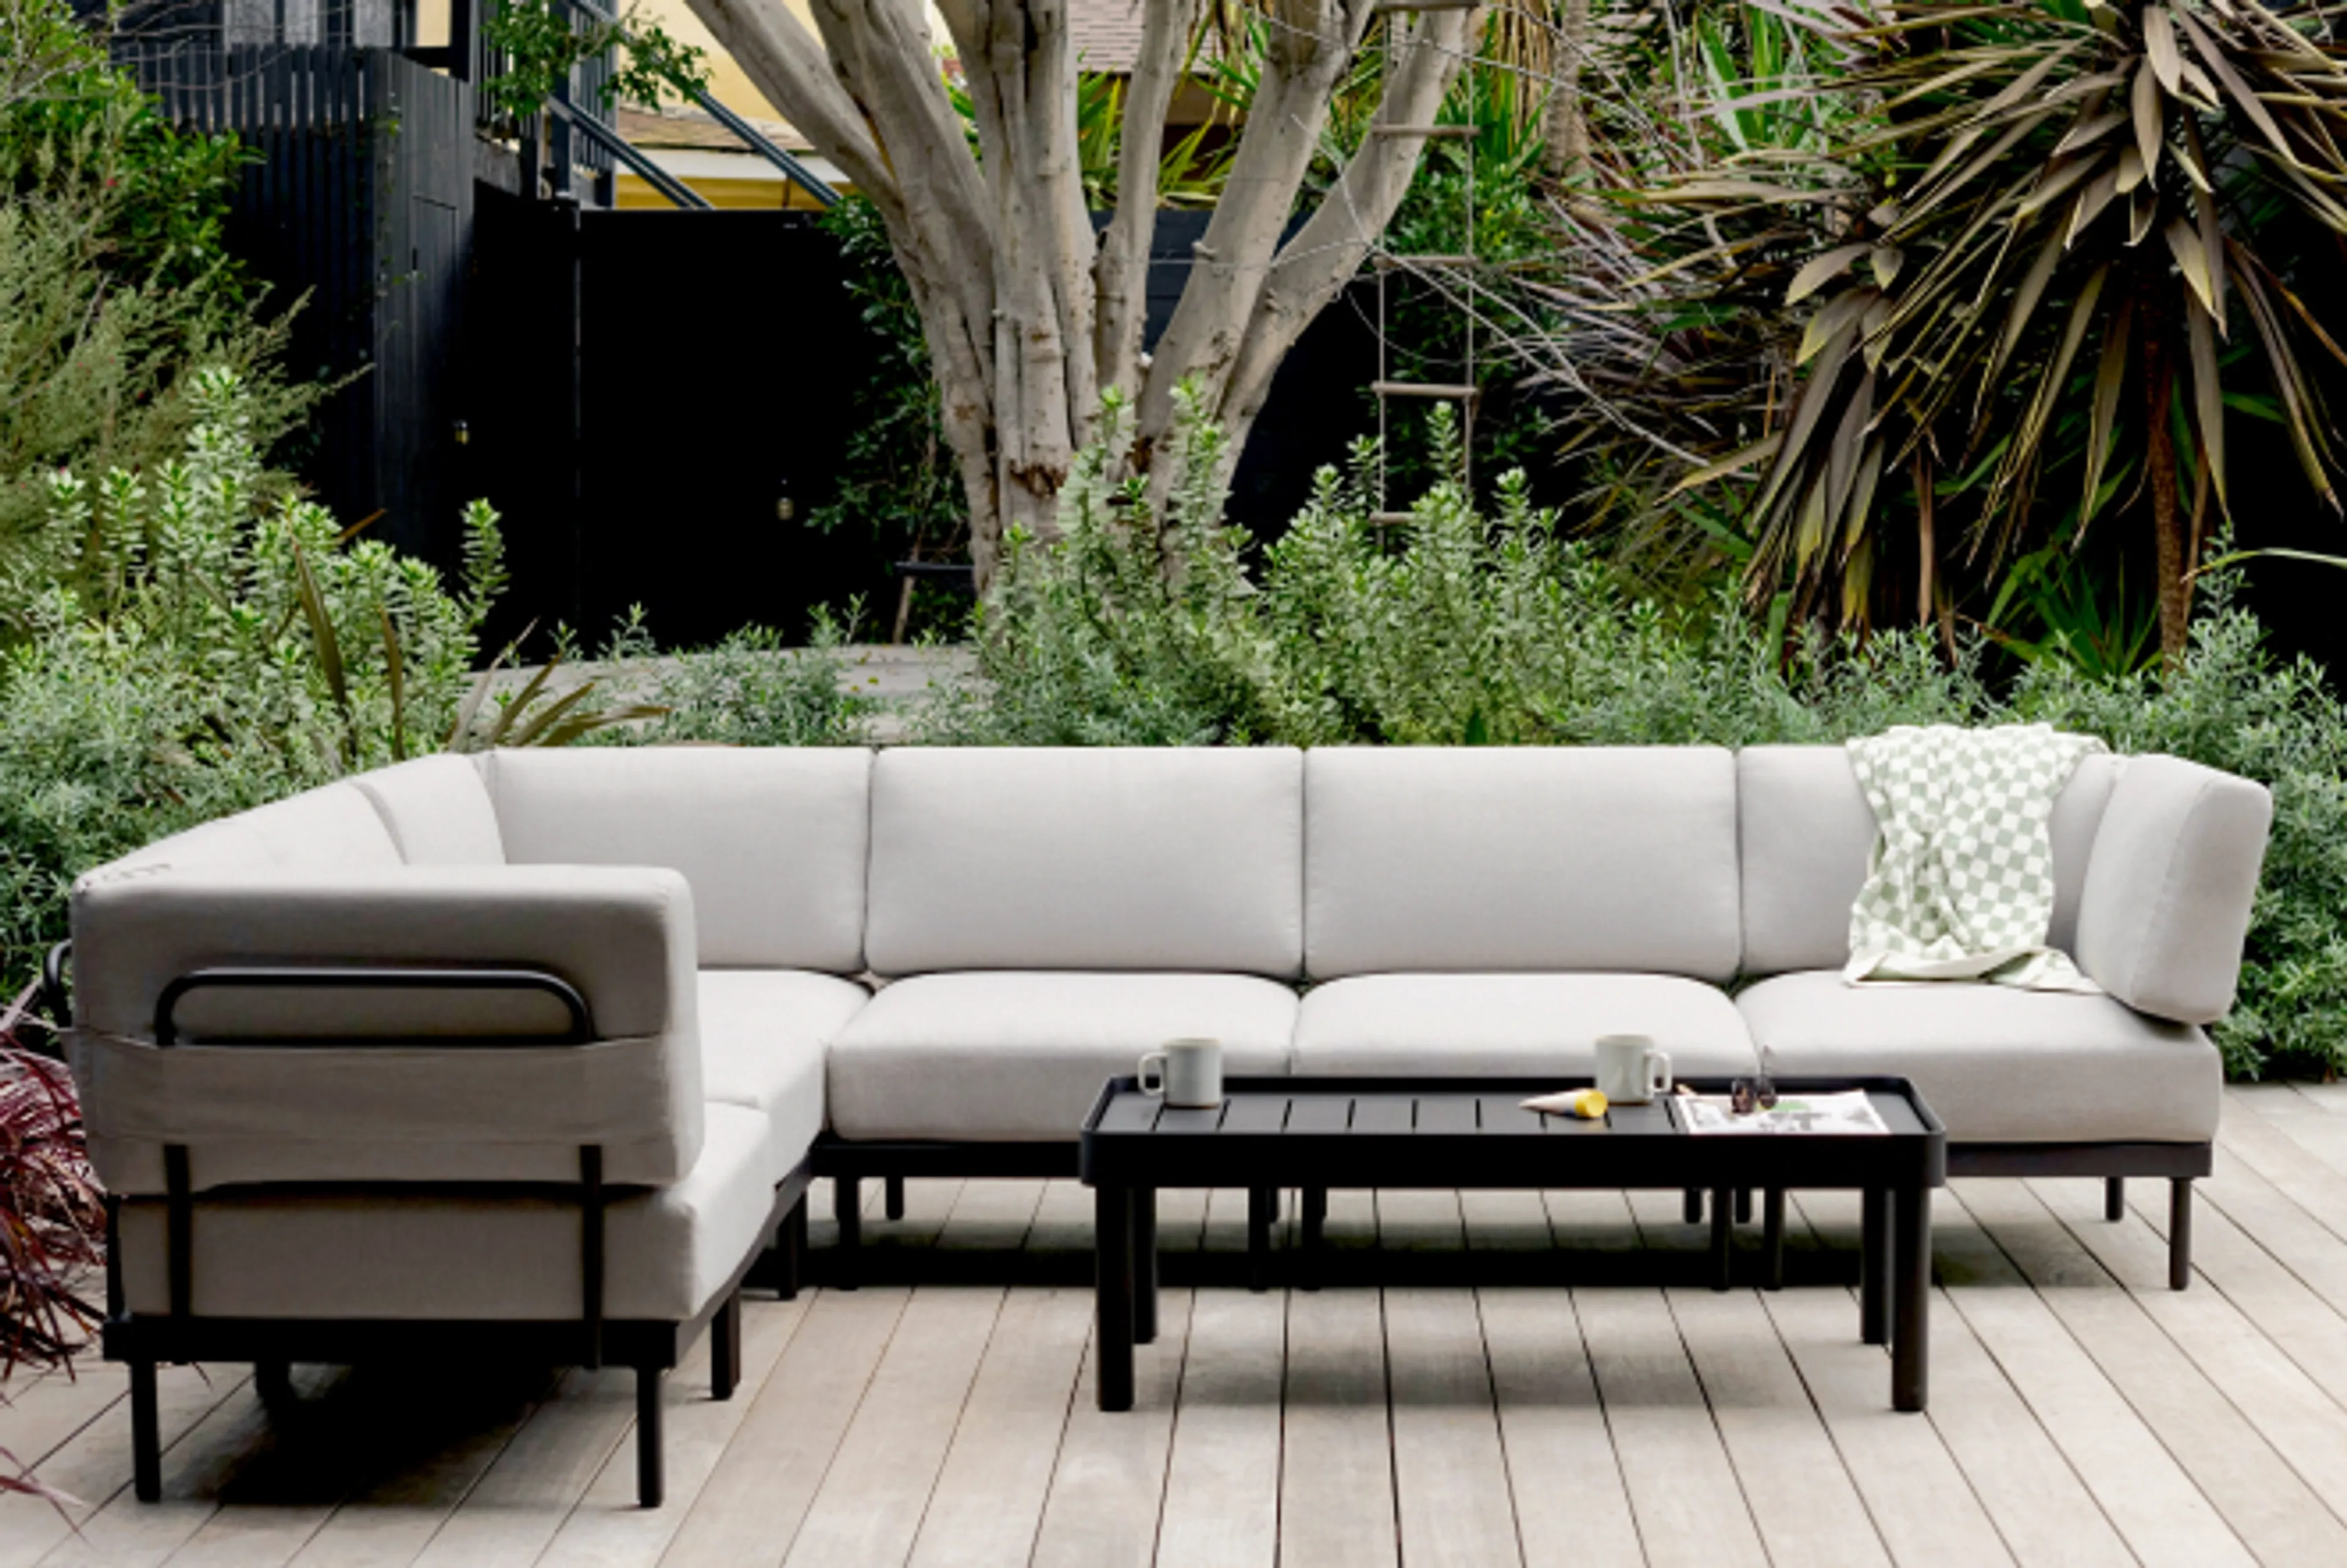 Relay sofa with coffee table in shale shown in outdoor patio setting